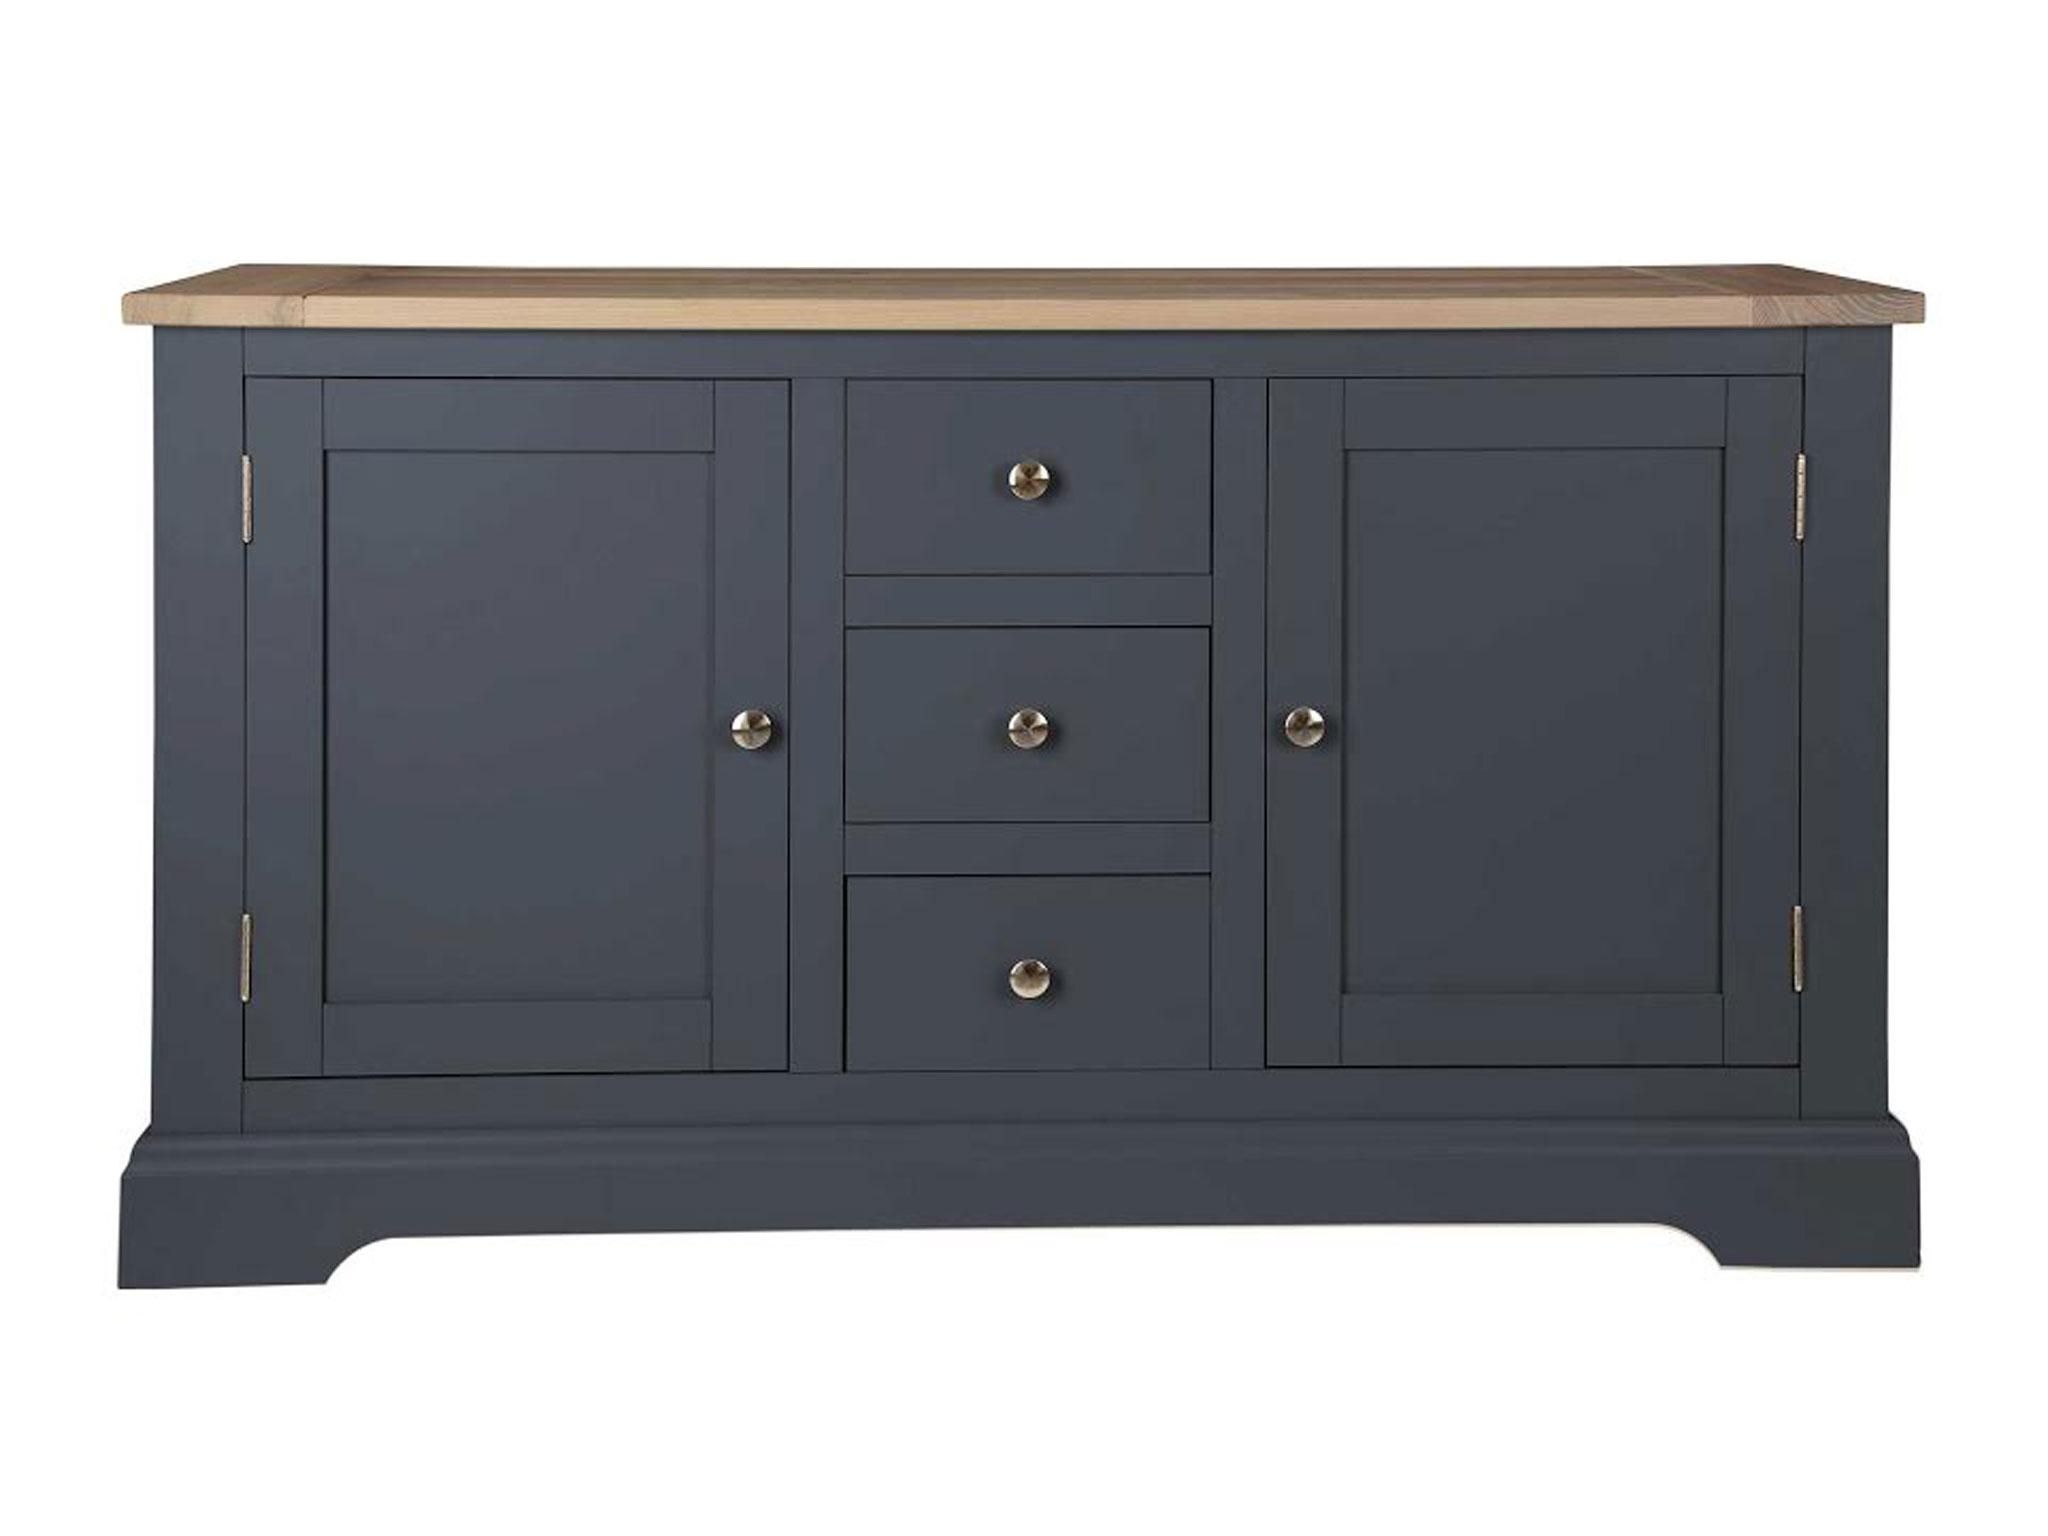 10 Best Sideboards | The Independent Pertaining To Best And Newest Oil Pale Finish 4 Door Sideboards (View 10 of 20)